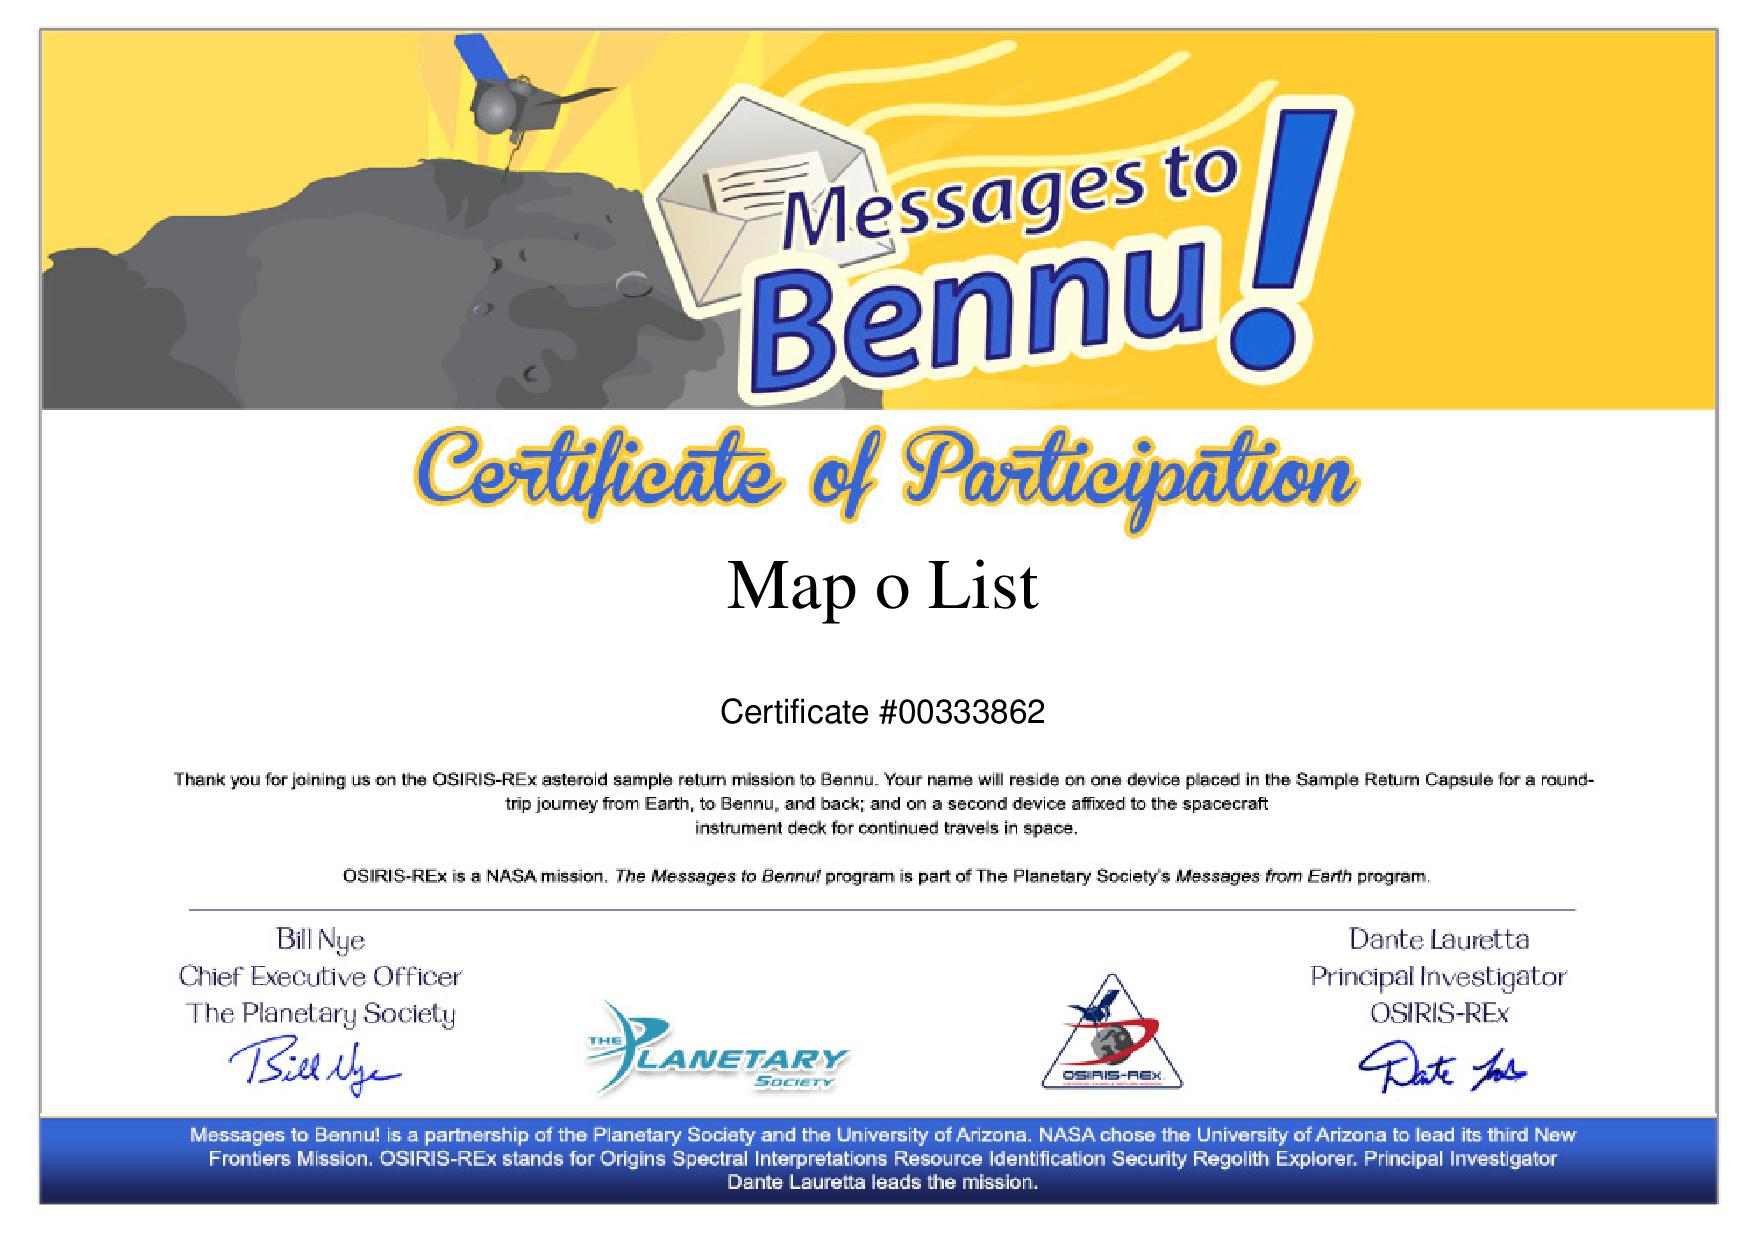 Mapolist sent message to Bennu, almost 200 million miles away from Earth, 2016